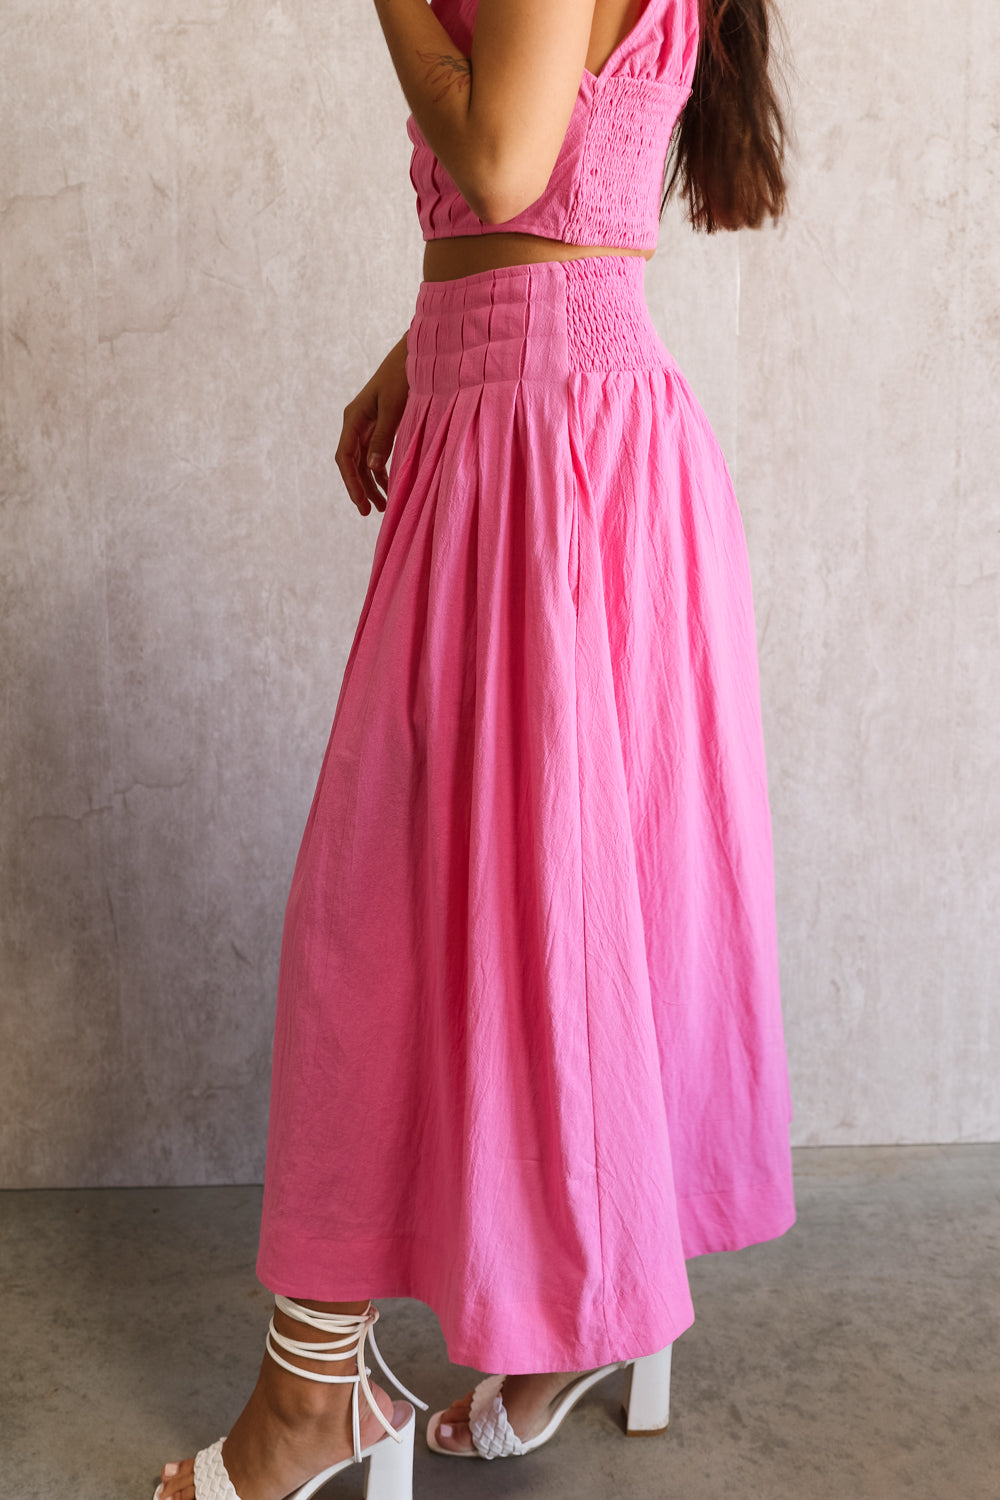 Side view of female model wearing the Valery Pink Tiered Midi Skirt which features Pink Cotton Fabric, Pink Lining, Upper Pleated Details and Smocked Waistband